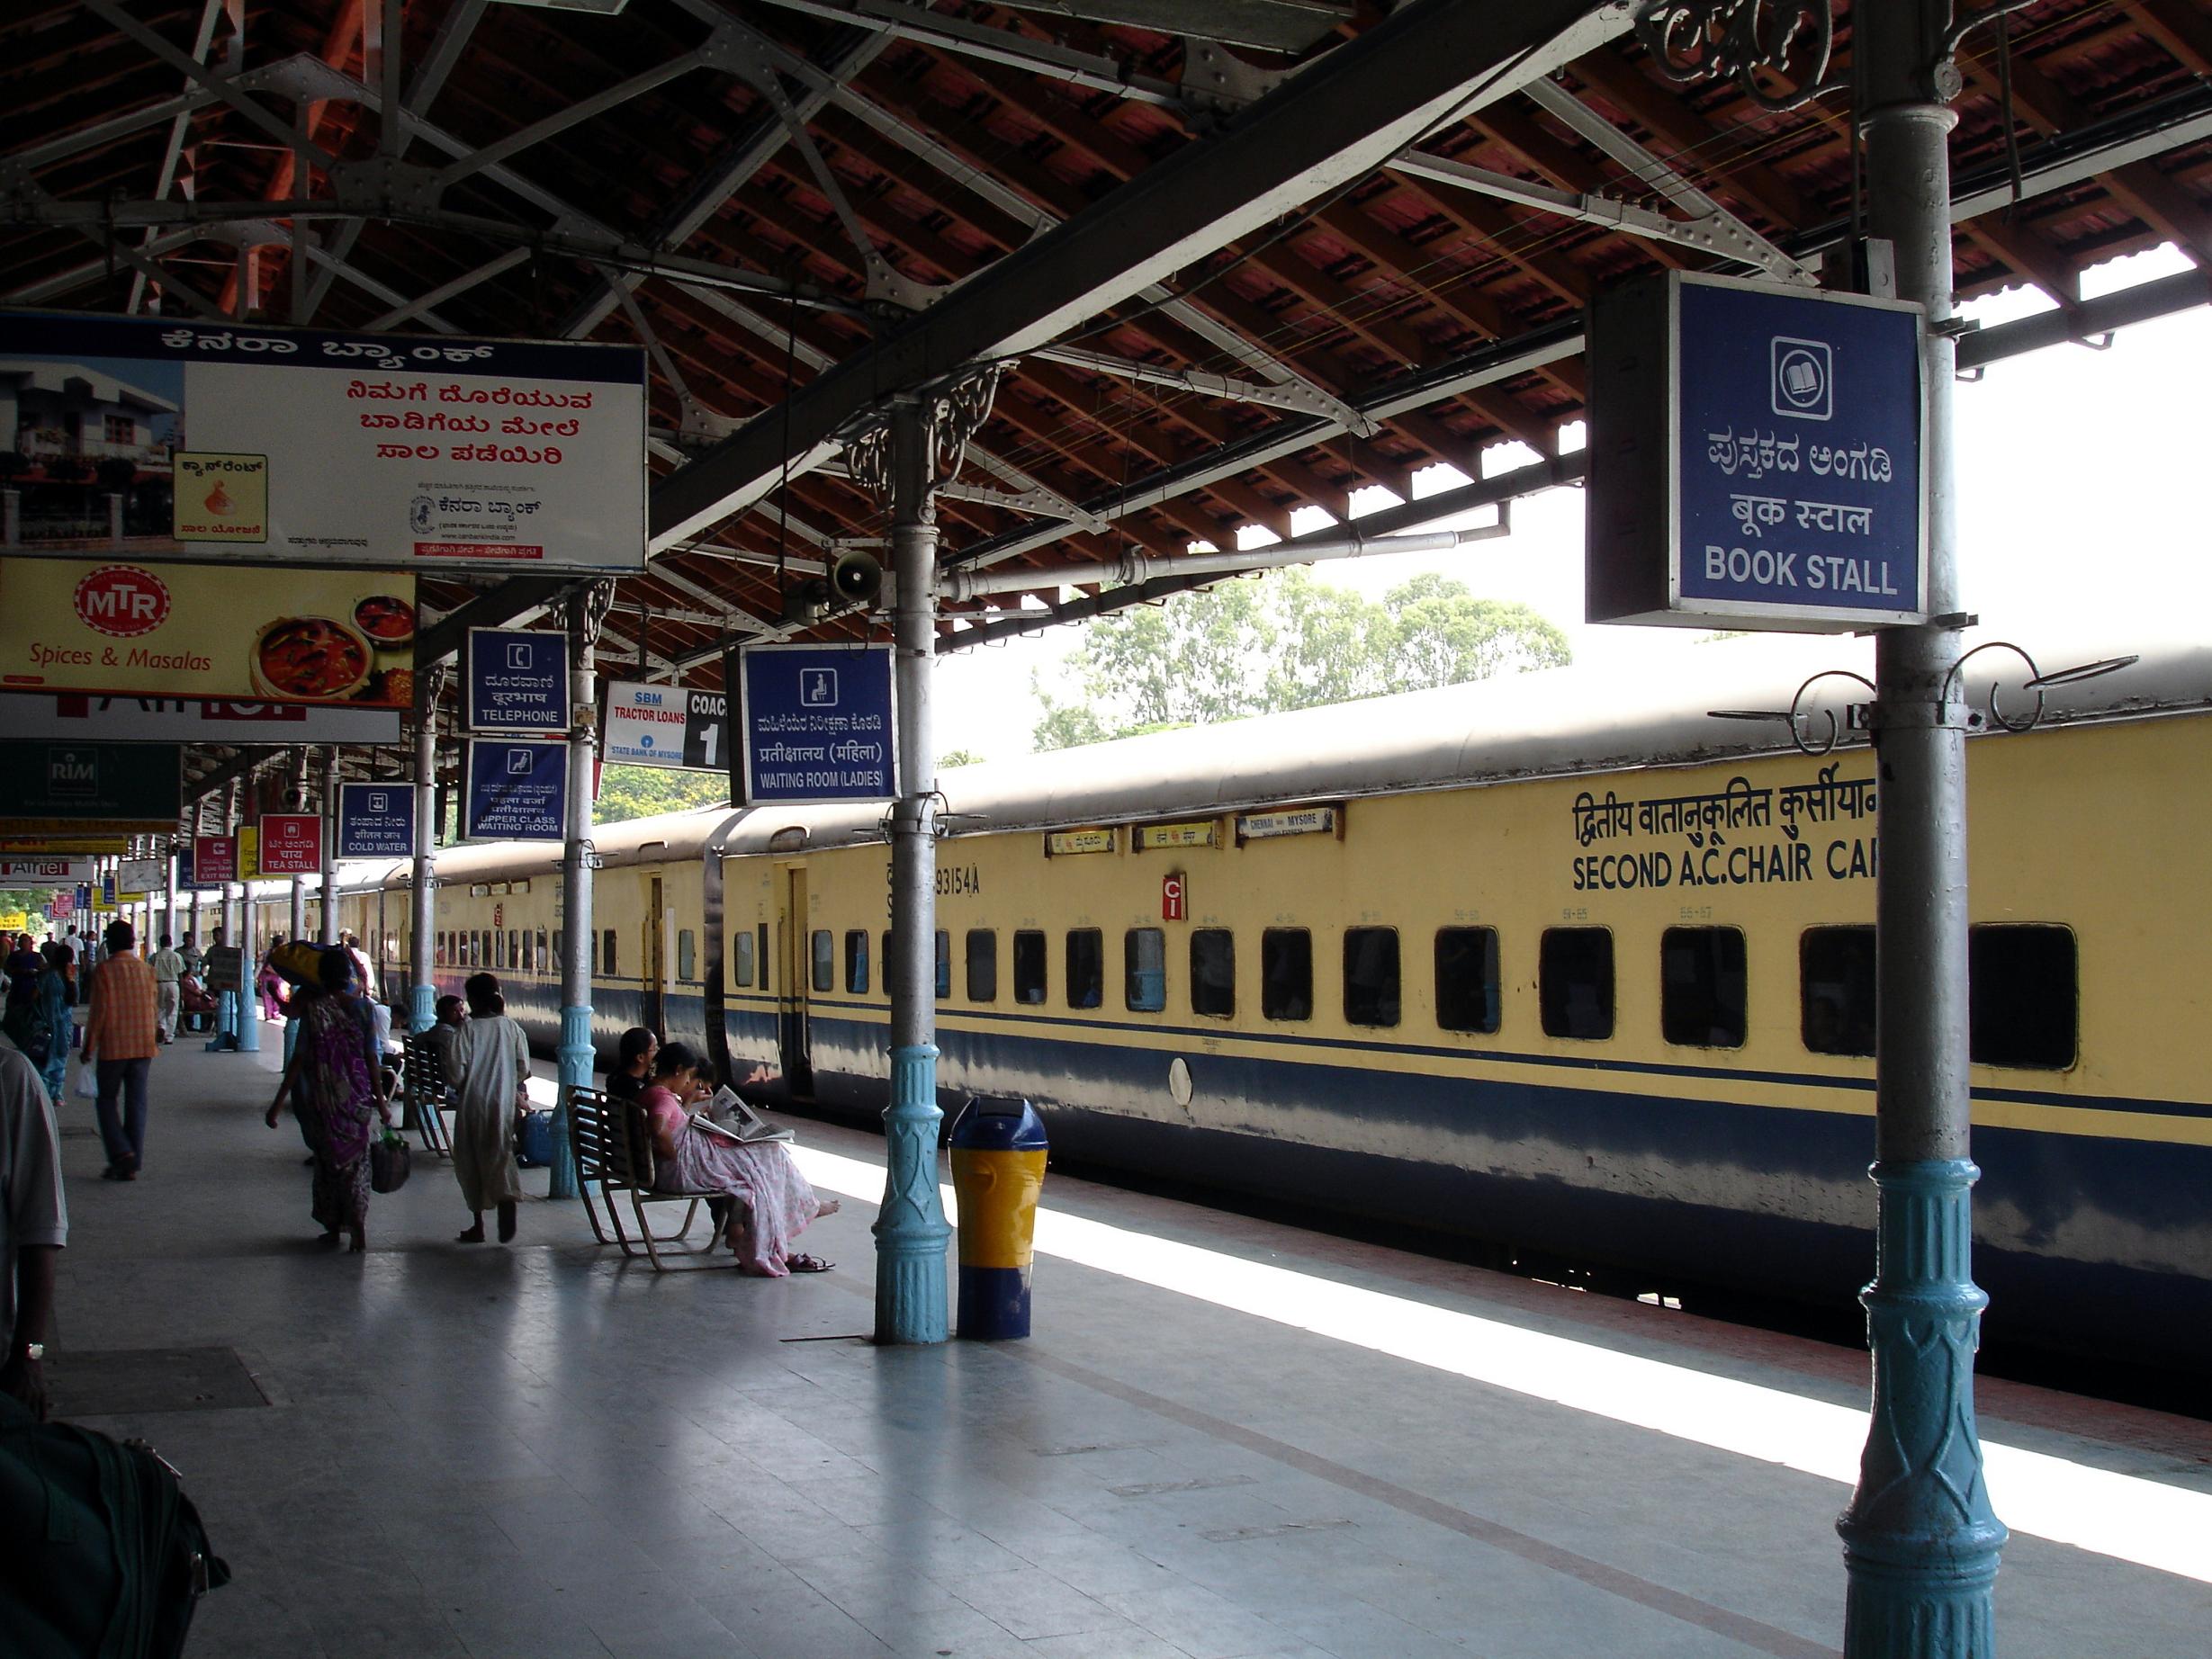 Google To Offer WiFi Access At 500 Railway Stations In India ...